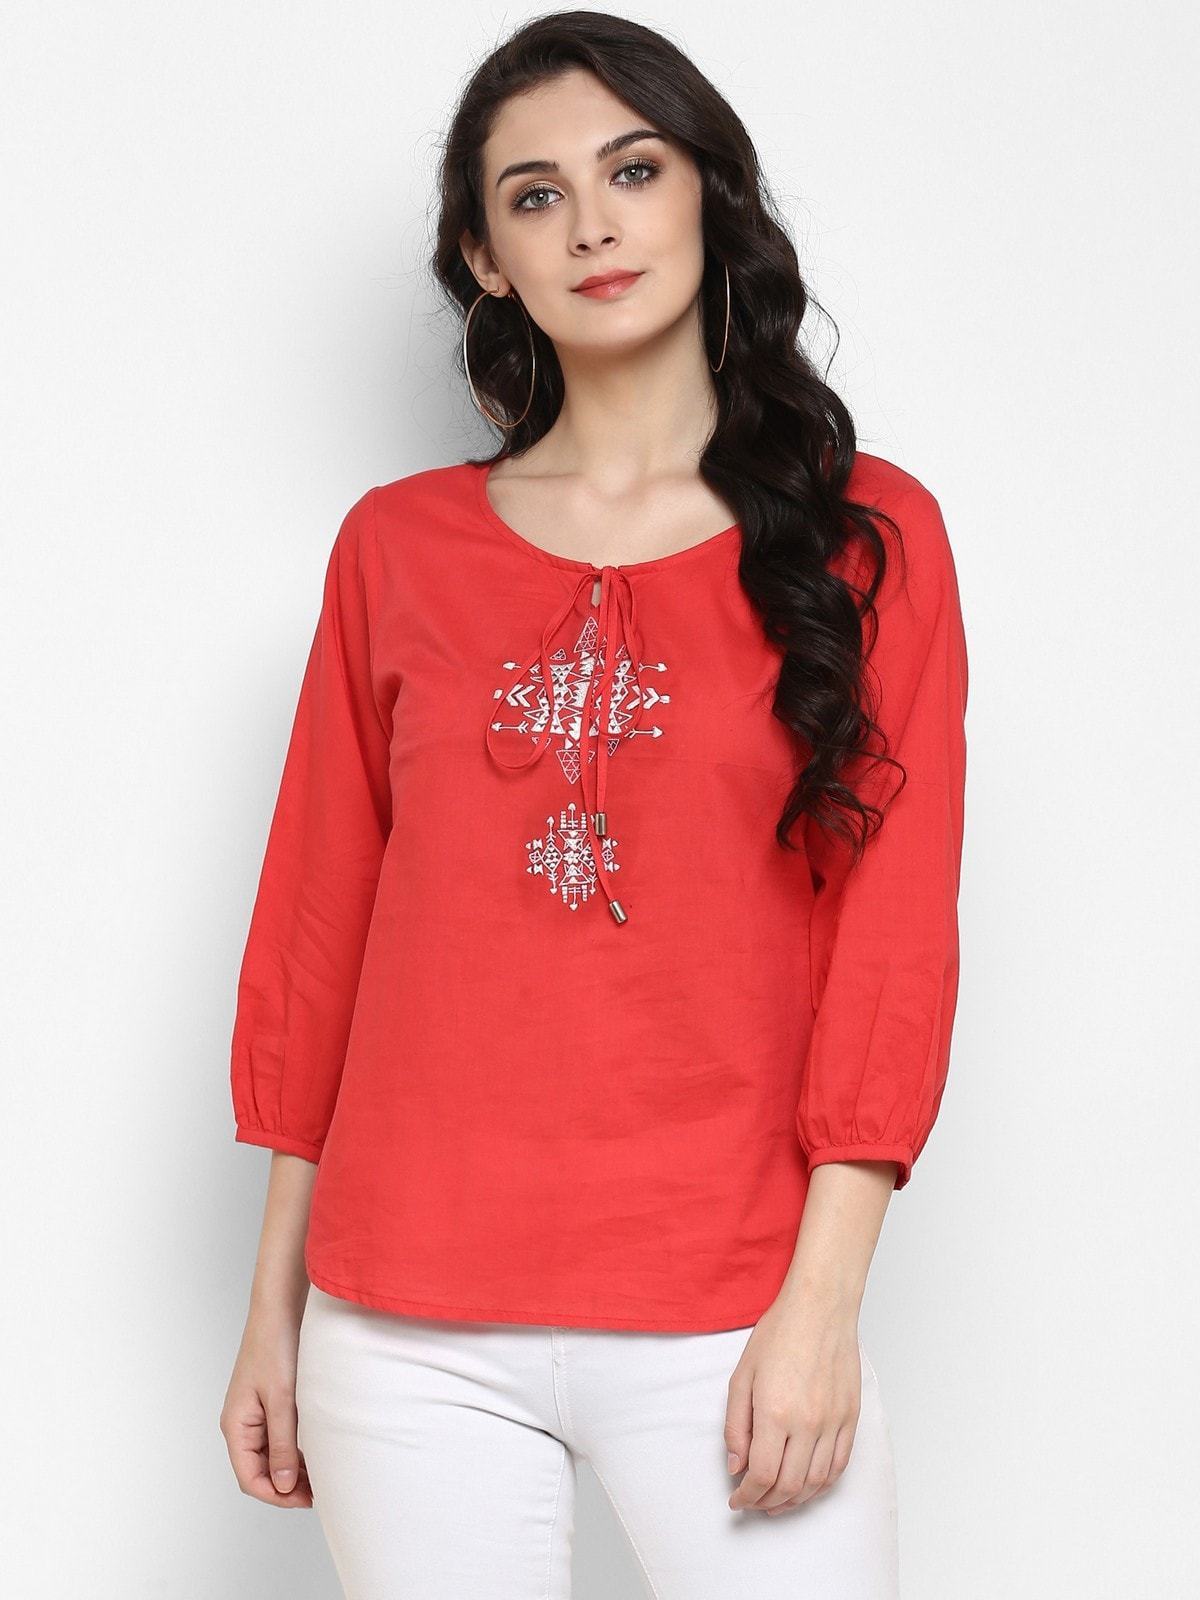 Women's Bohemian Embroidered Top - Pannkh